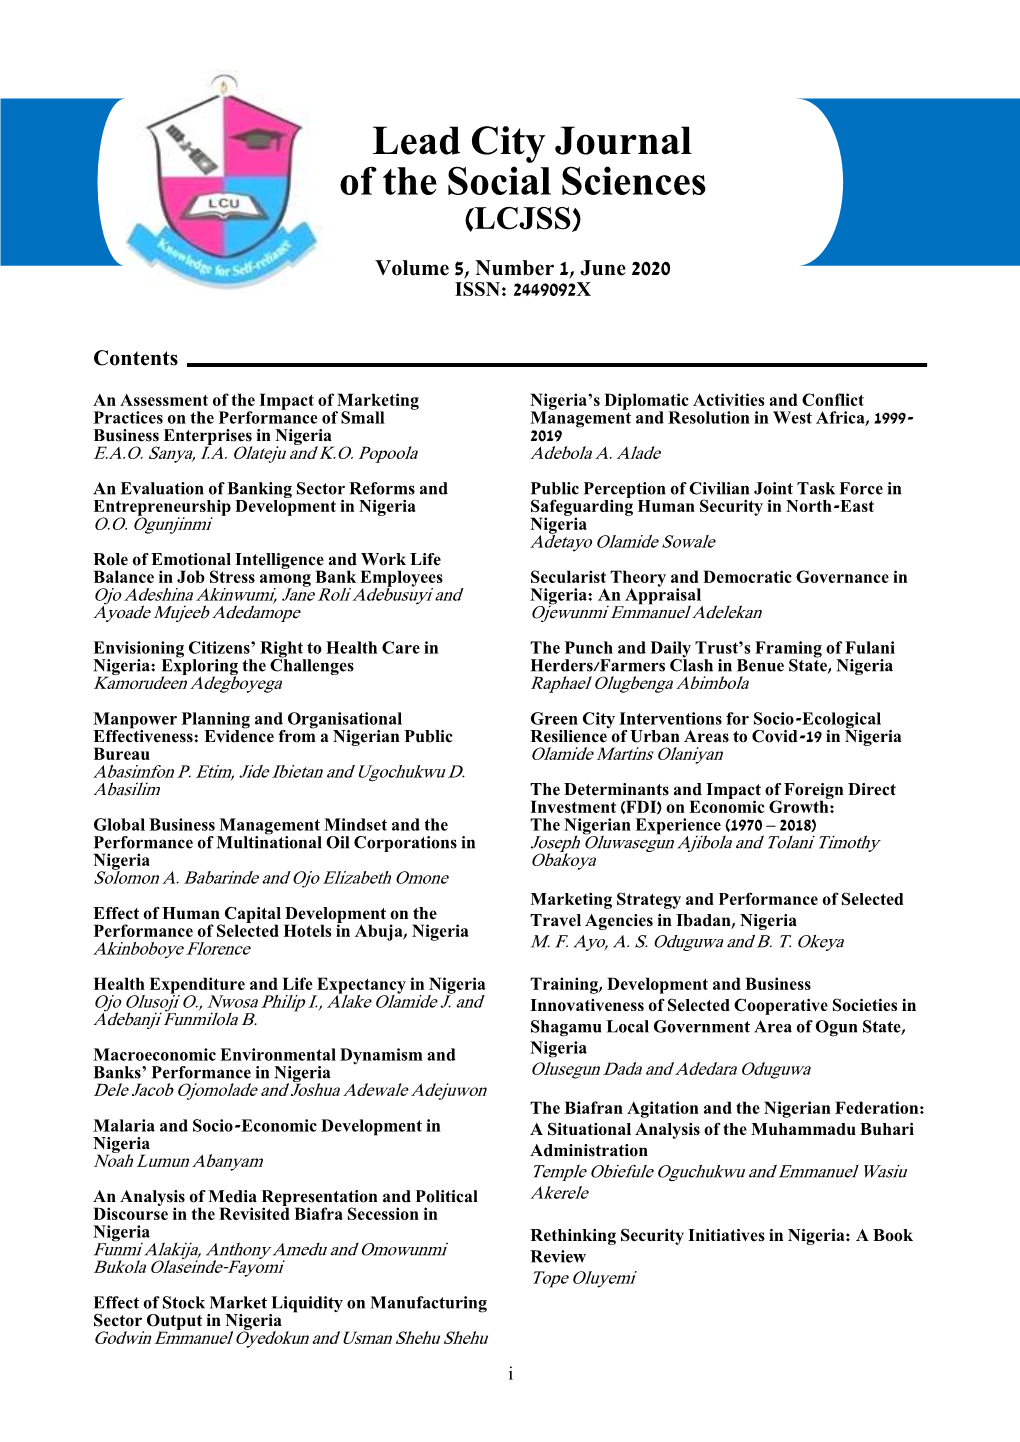 Lead City Journal of the Social Sciences (LCJSS)